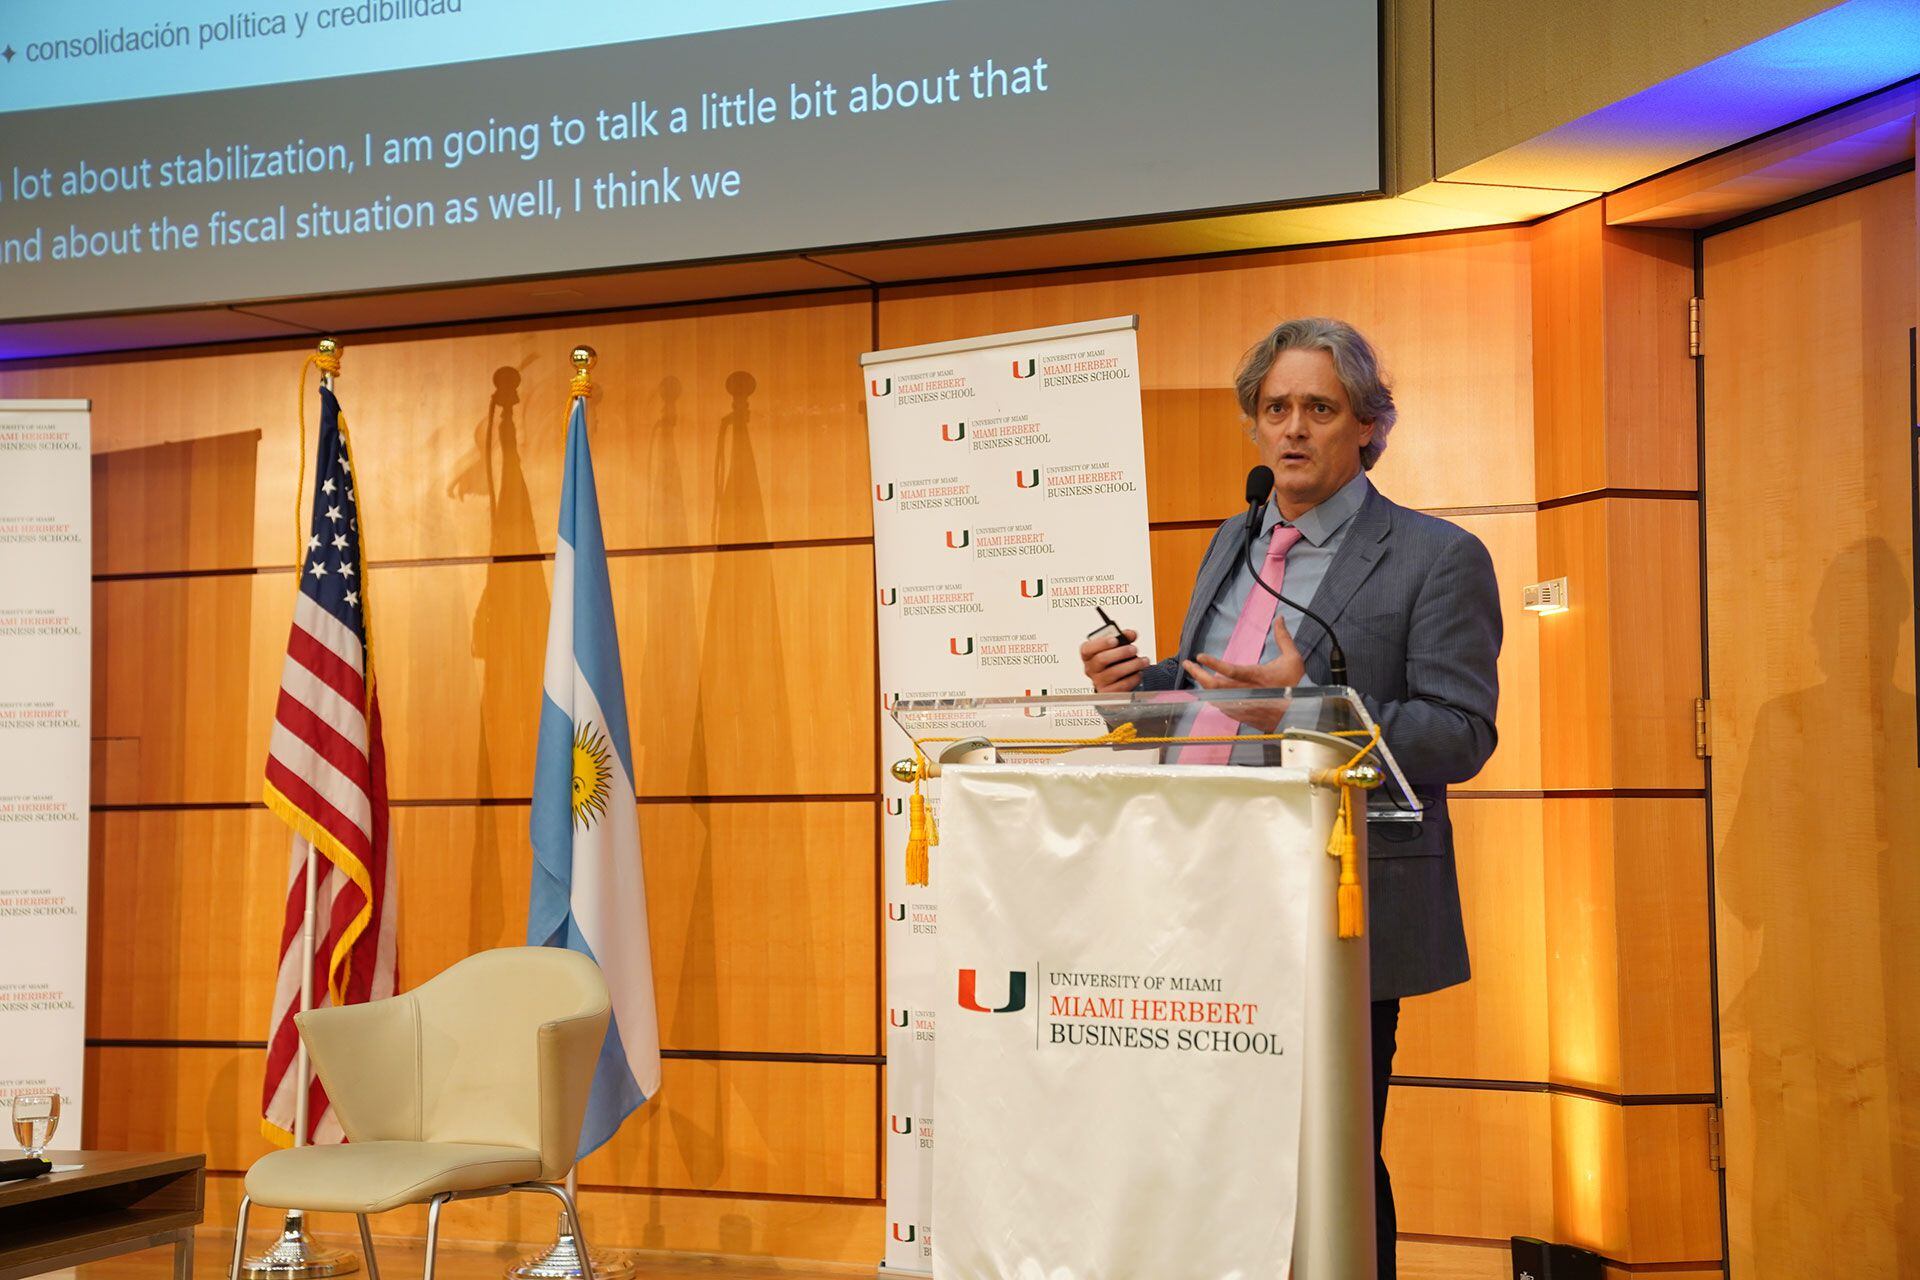 Pan-American economic forum at the University of Miami: Argentina in transition